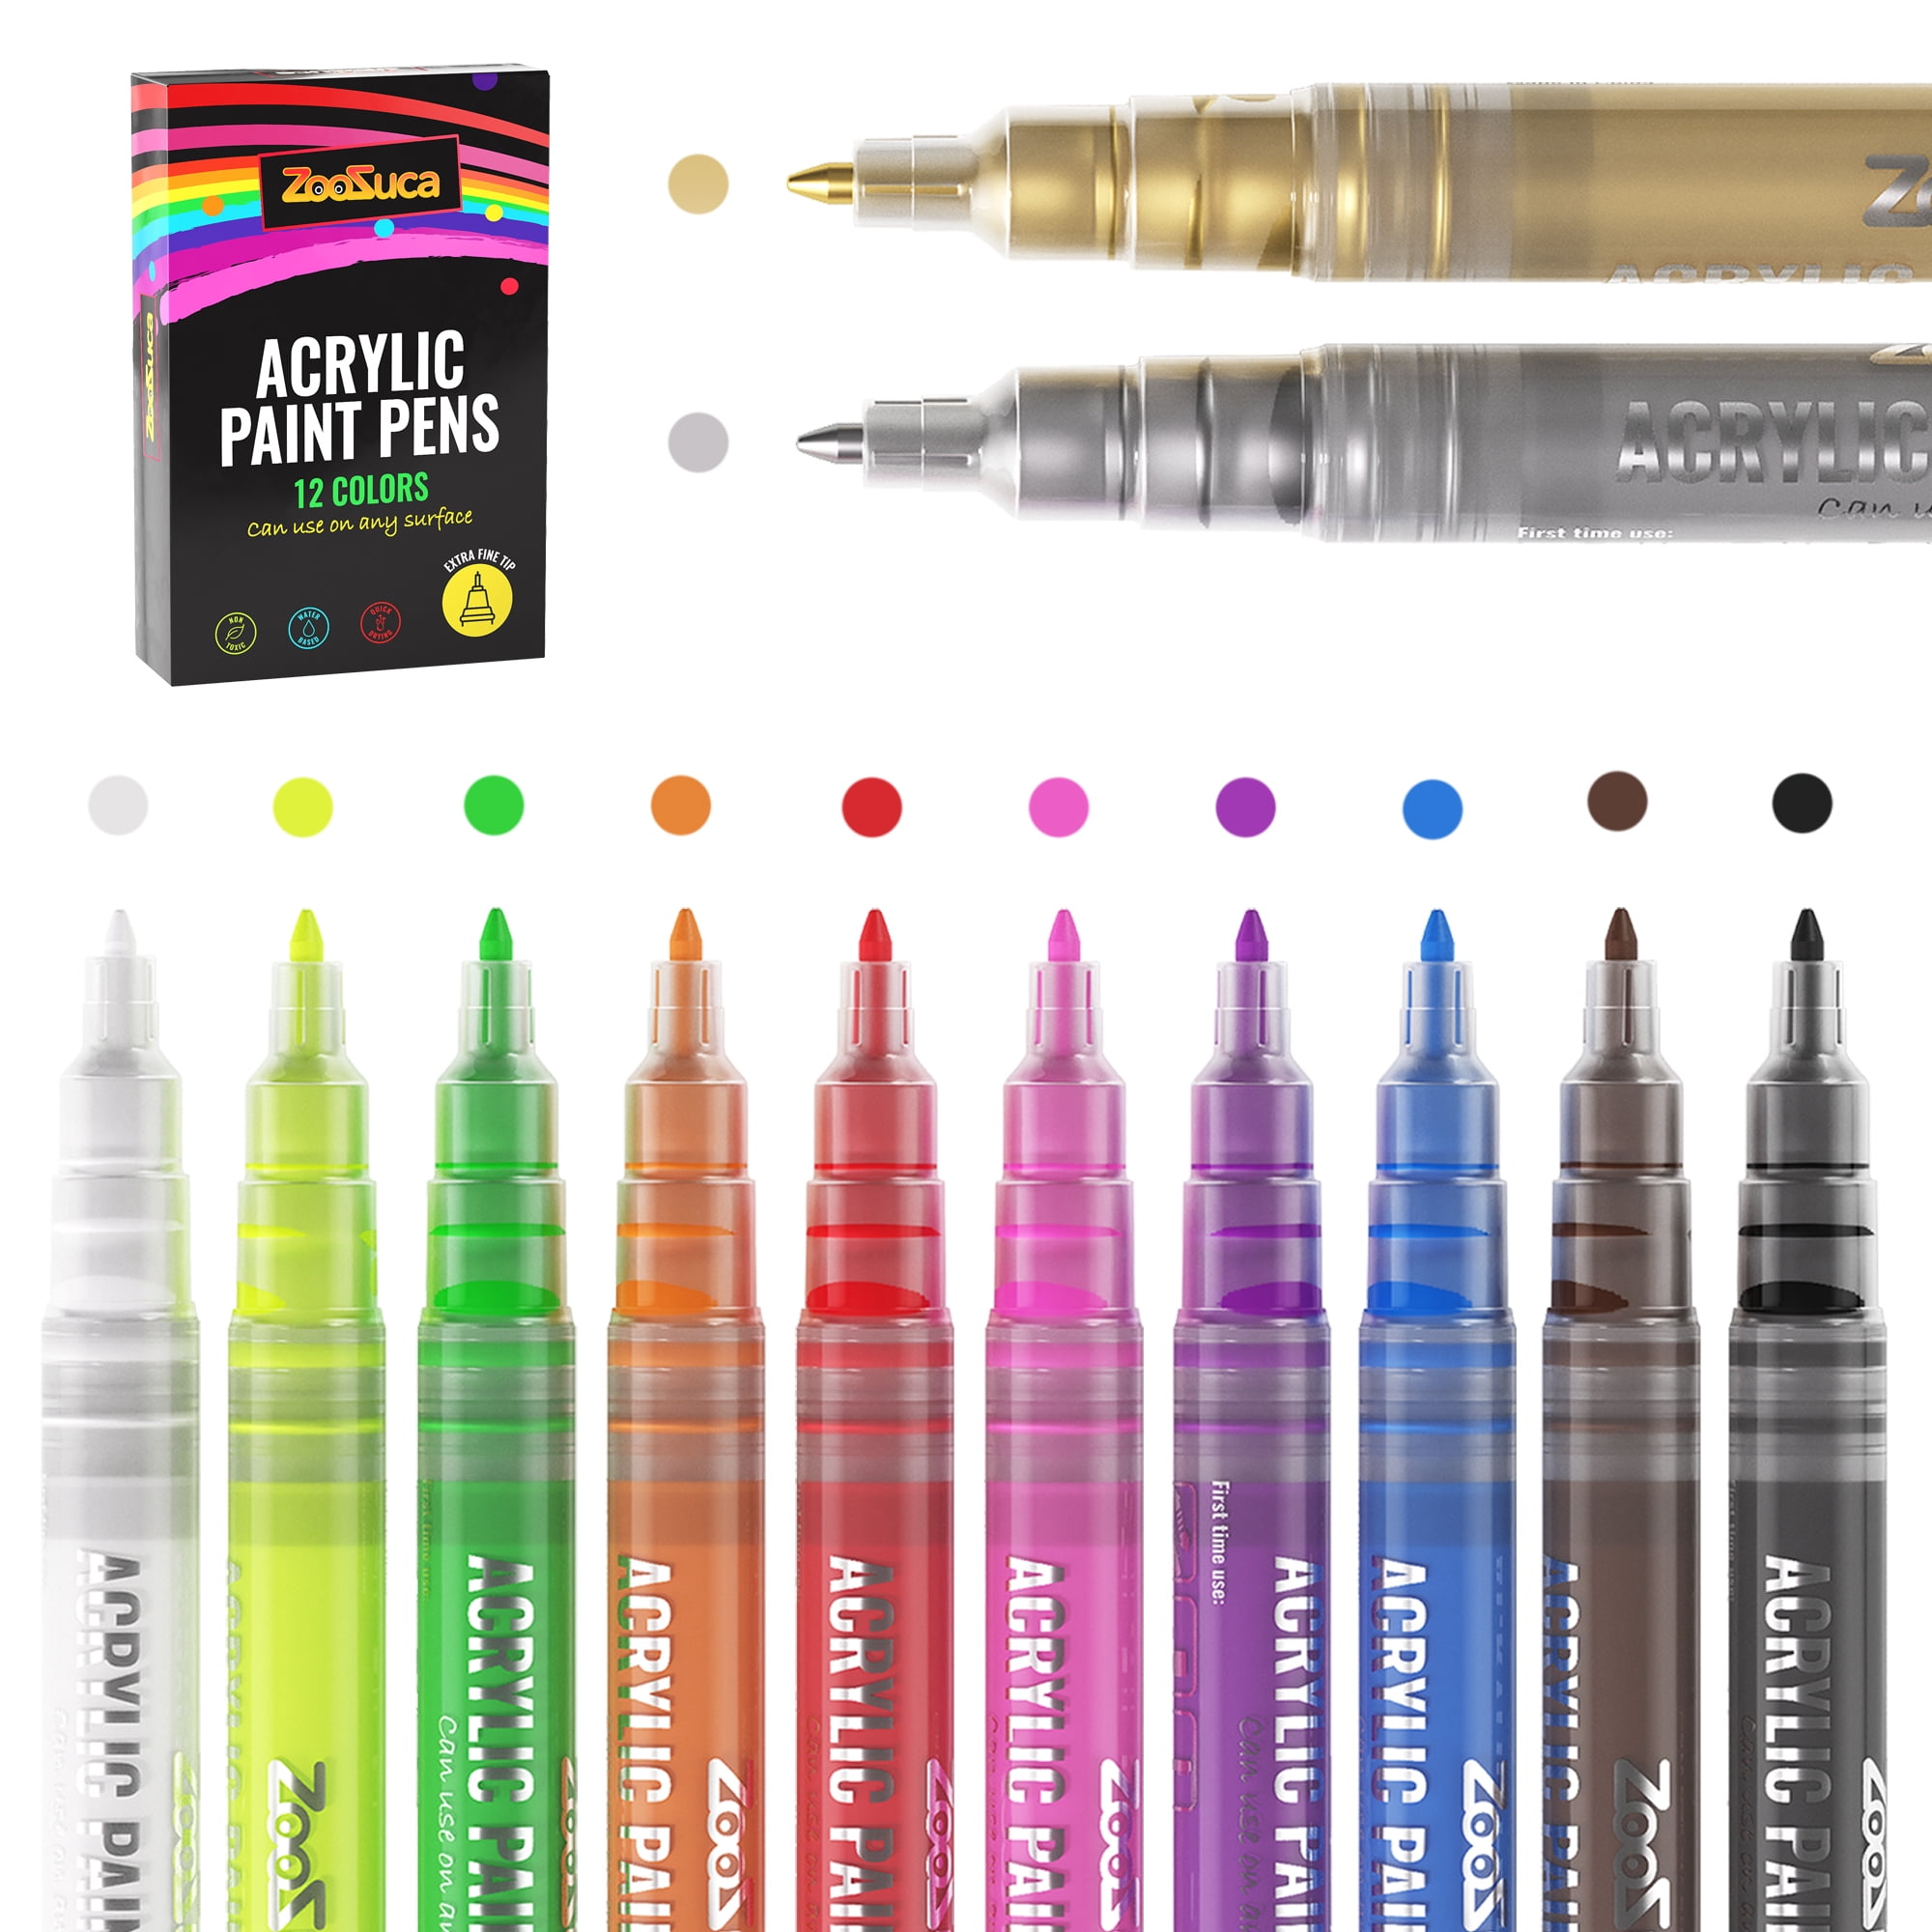 17 Artistro Cute Acrylic Paint Pens 12 Gold & Silver 5 White Markers  Extra-fine Tip Artist Gifts for Rock Painting, Wood Art, Glass Art 